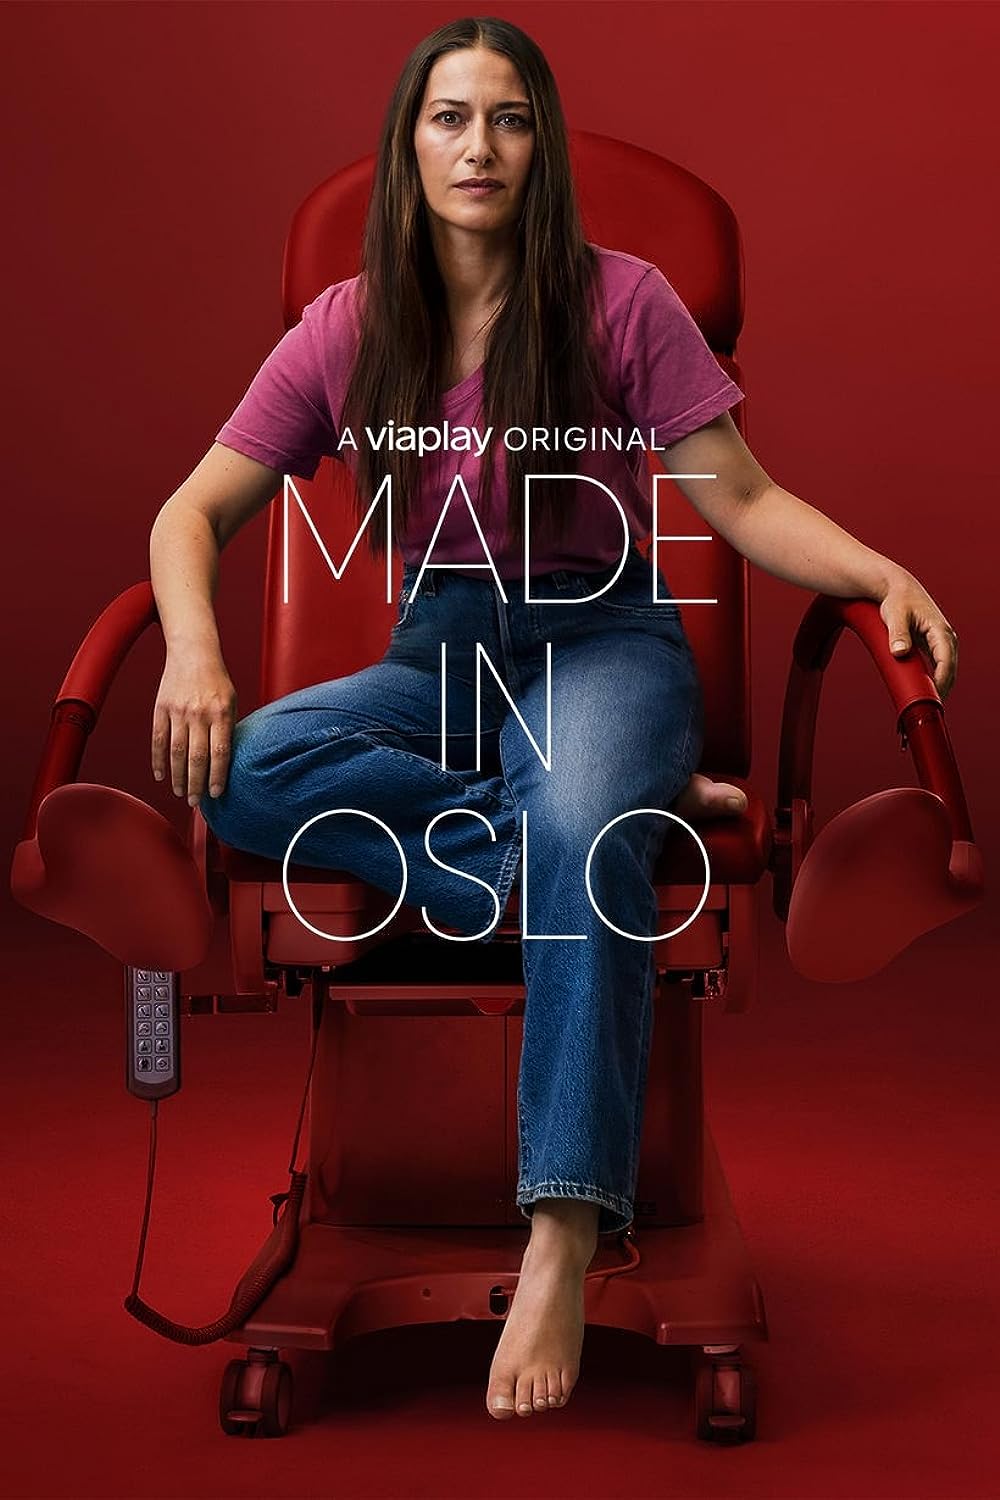 Made in Oslo